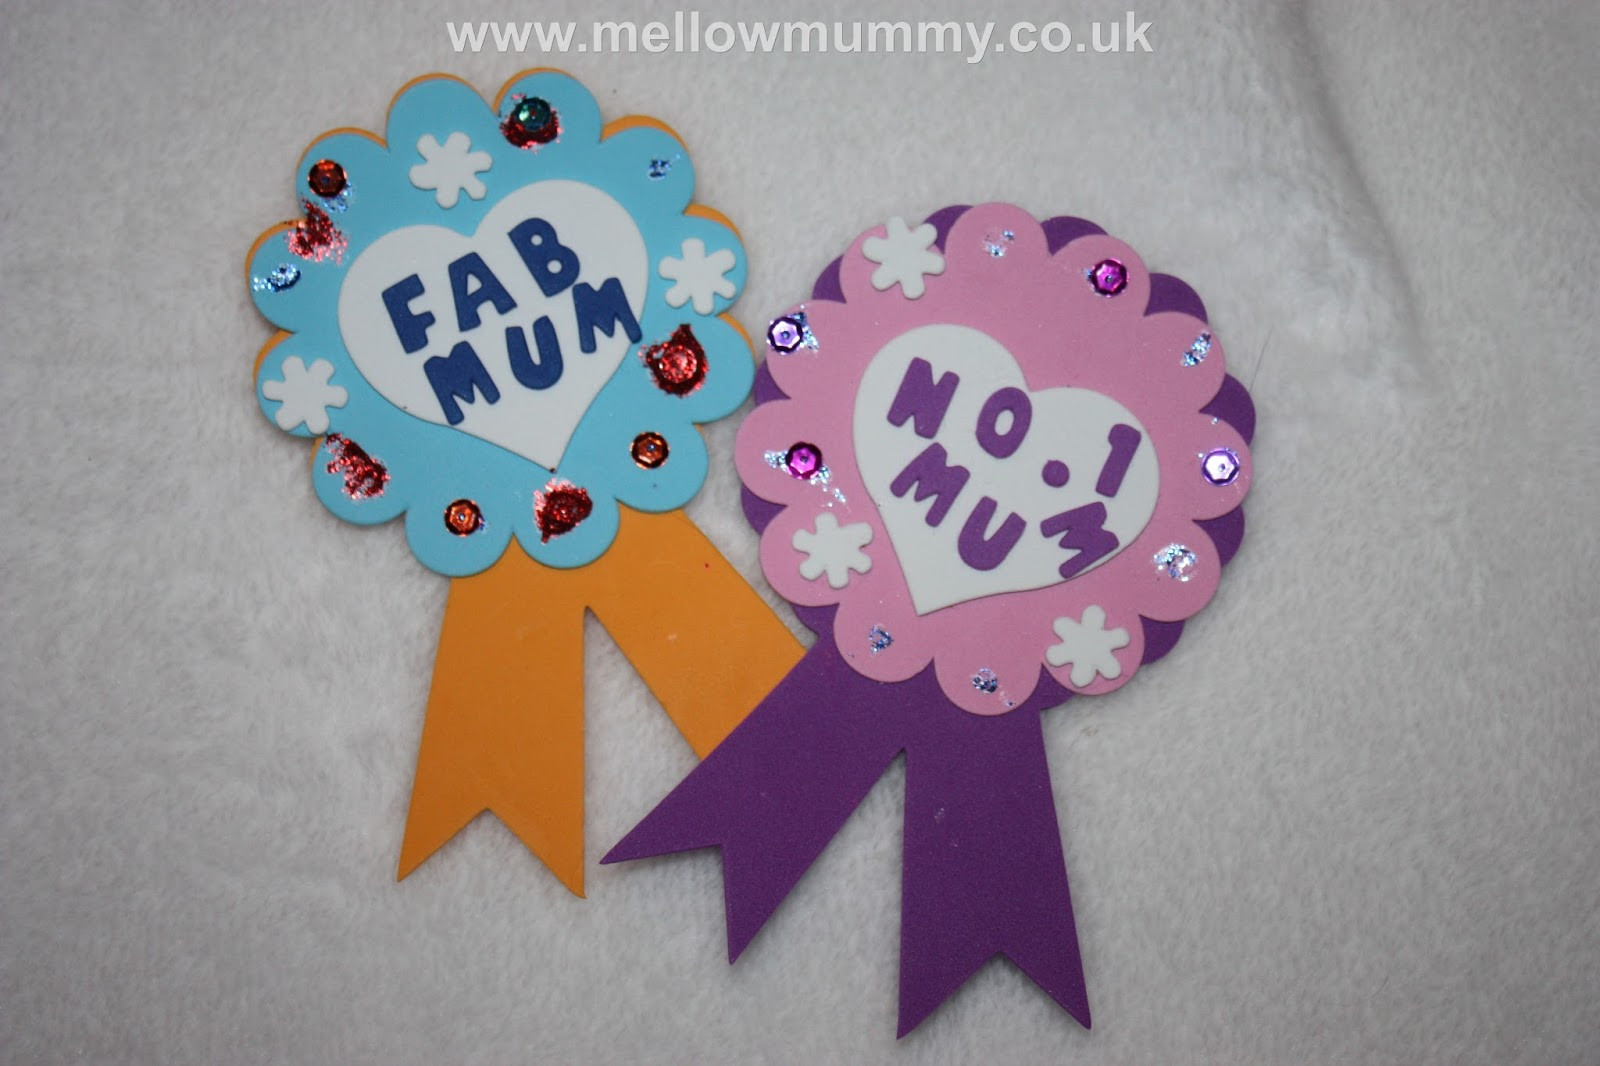 Mothers Day Arts And Crafts
 Mellow Mummy Mothers Day Craft Activities for Kids